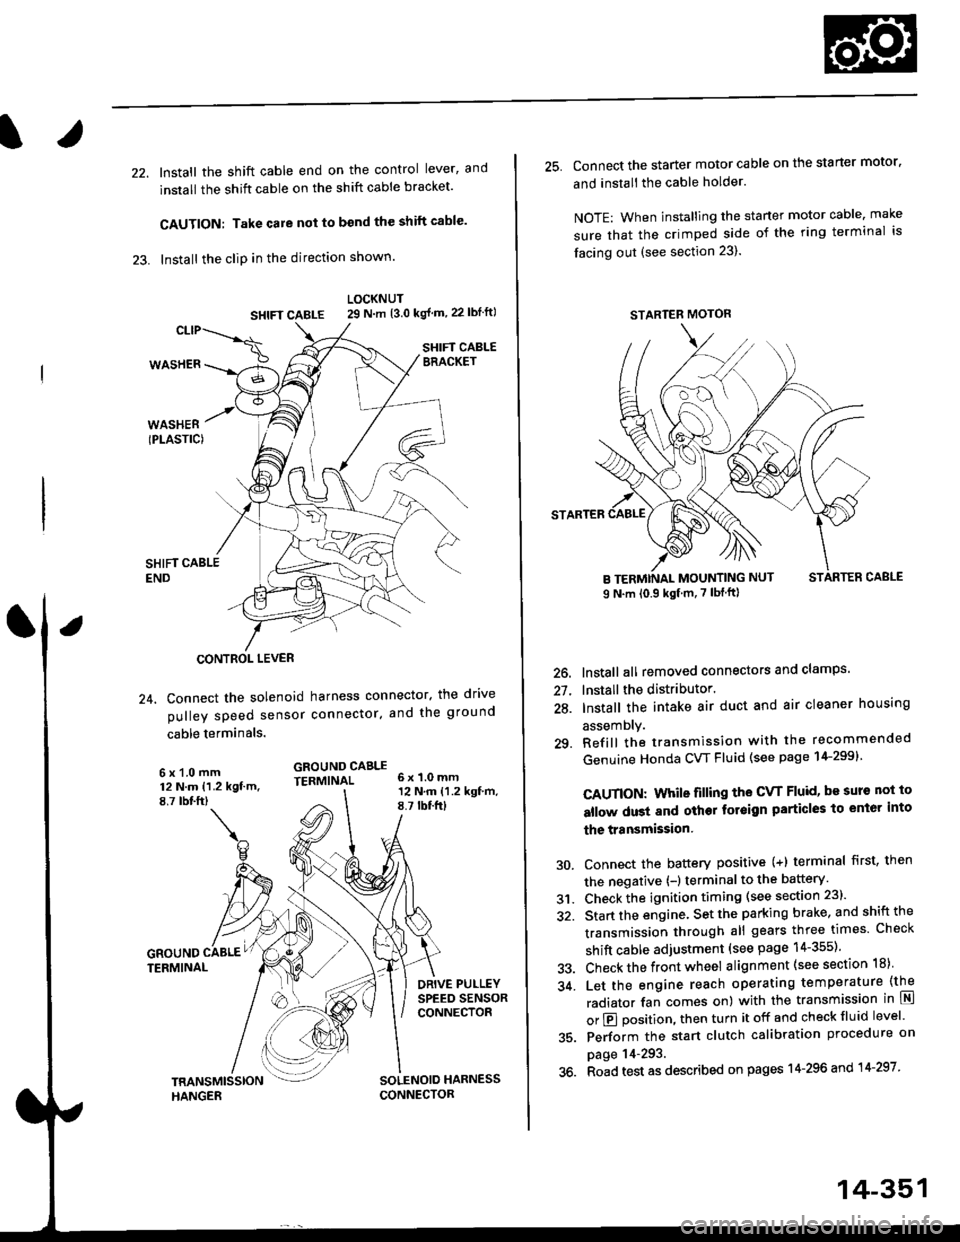 HONDA CIVIC 1999 6.G Workshop Manual 22. Install the shift cable end on the control lever, and
install the shift cable on the shift cable bracket
CAUTION: Take care not to bend the shift cable
23. lnstall the clip in the direction show